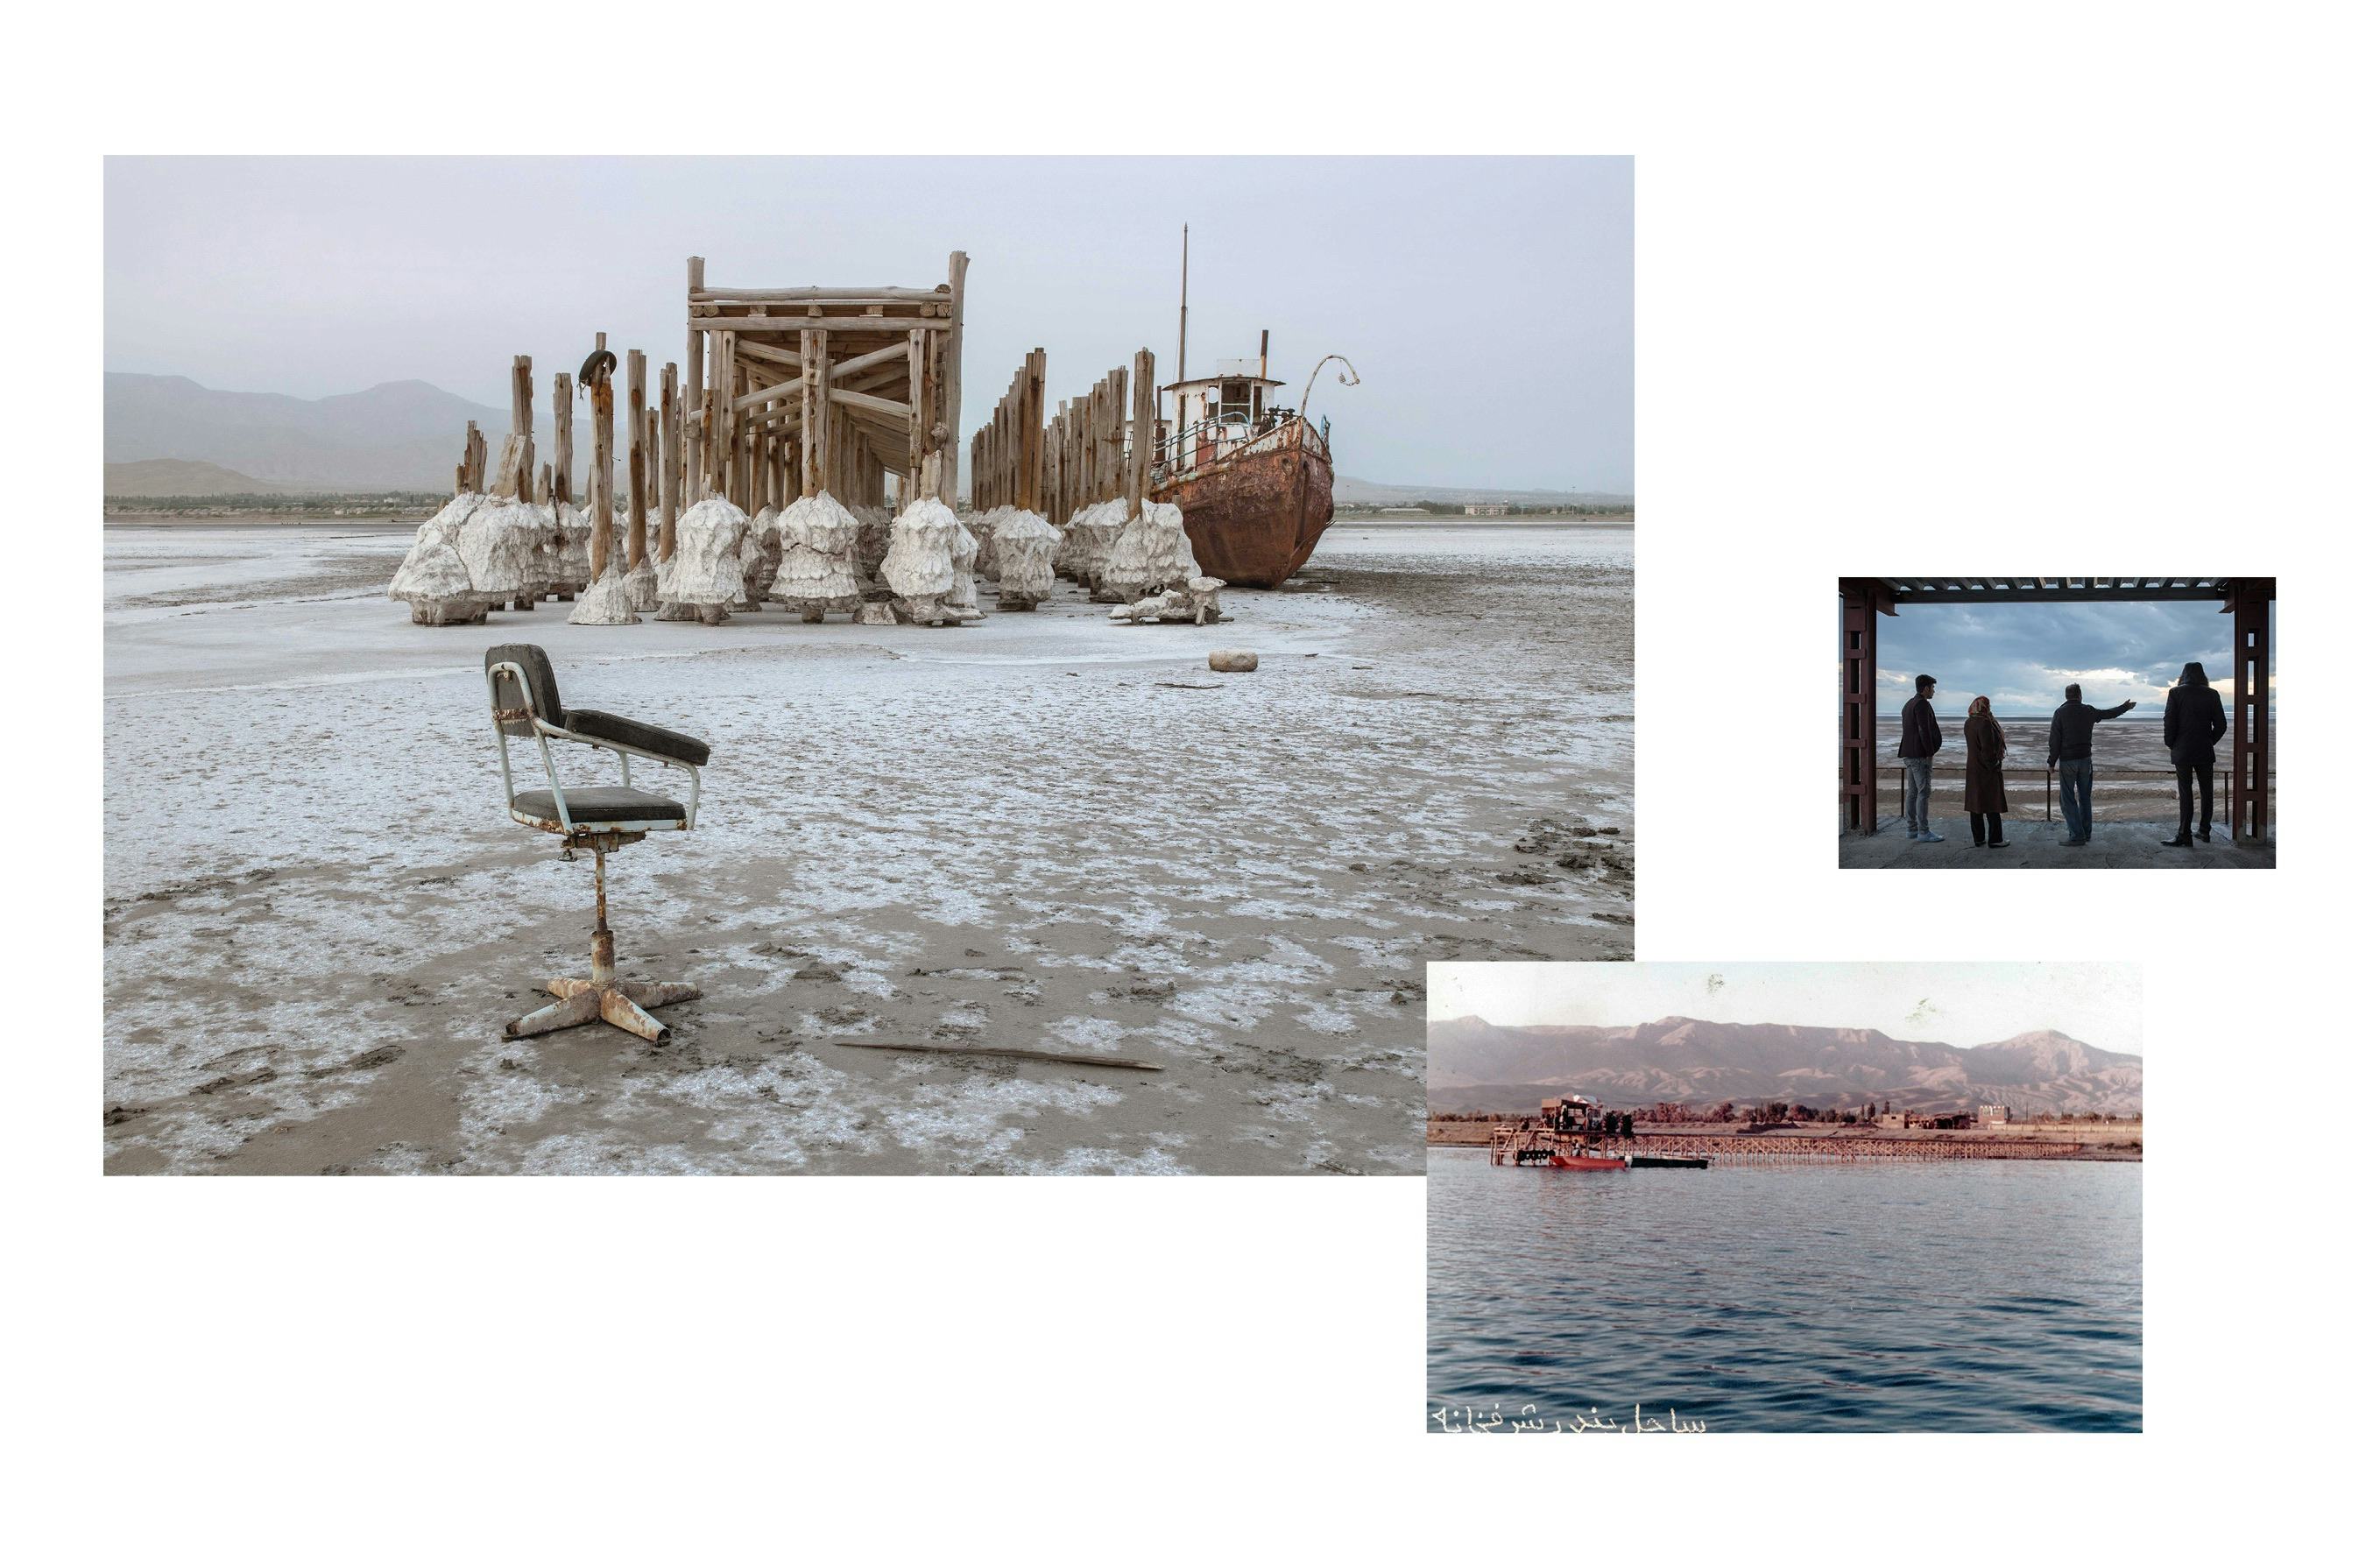 Spread from Foam Magazine #64: EXTREMES–The Environmental Issue, showing images from The Eyes of Earth by Solmaz Daryani